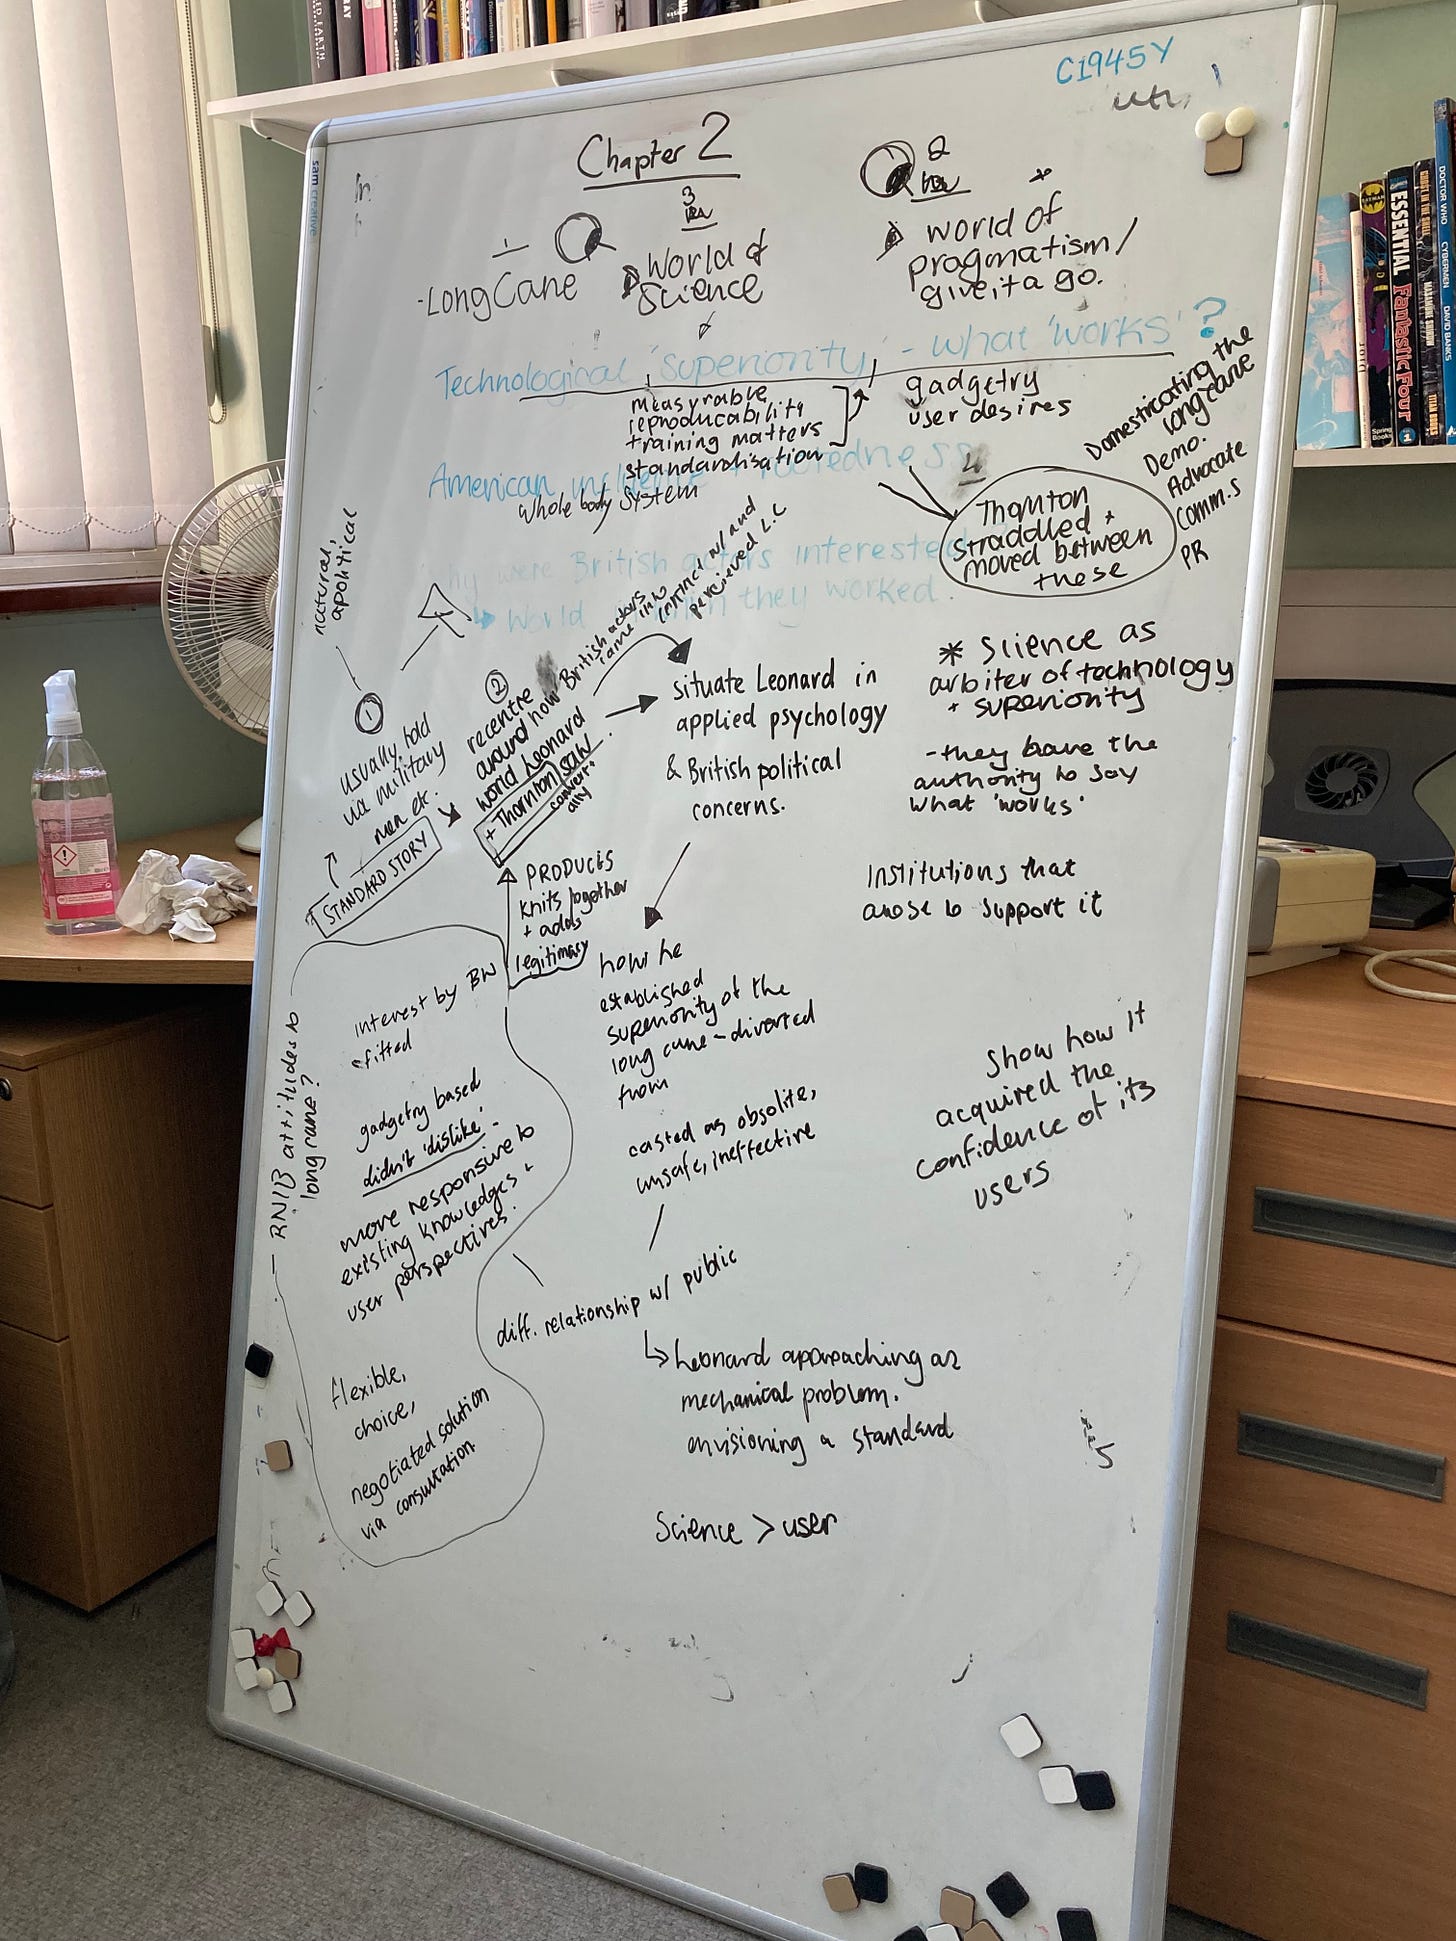 Photograph of a giant whiteboard, propped up in an office filled with books. There is lots of writing on the board, with chapter 2 written at the top and a whole lot of notes, circles, arrows and squiggles linking things together.